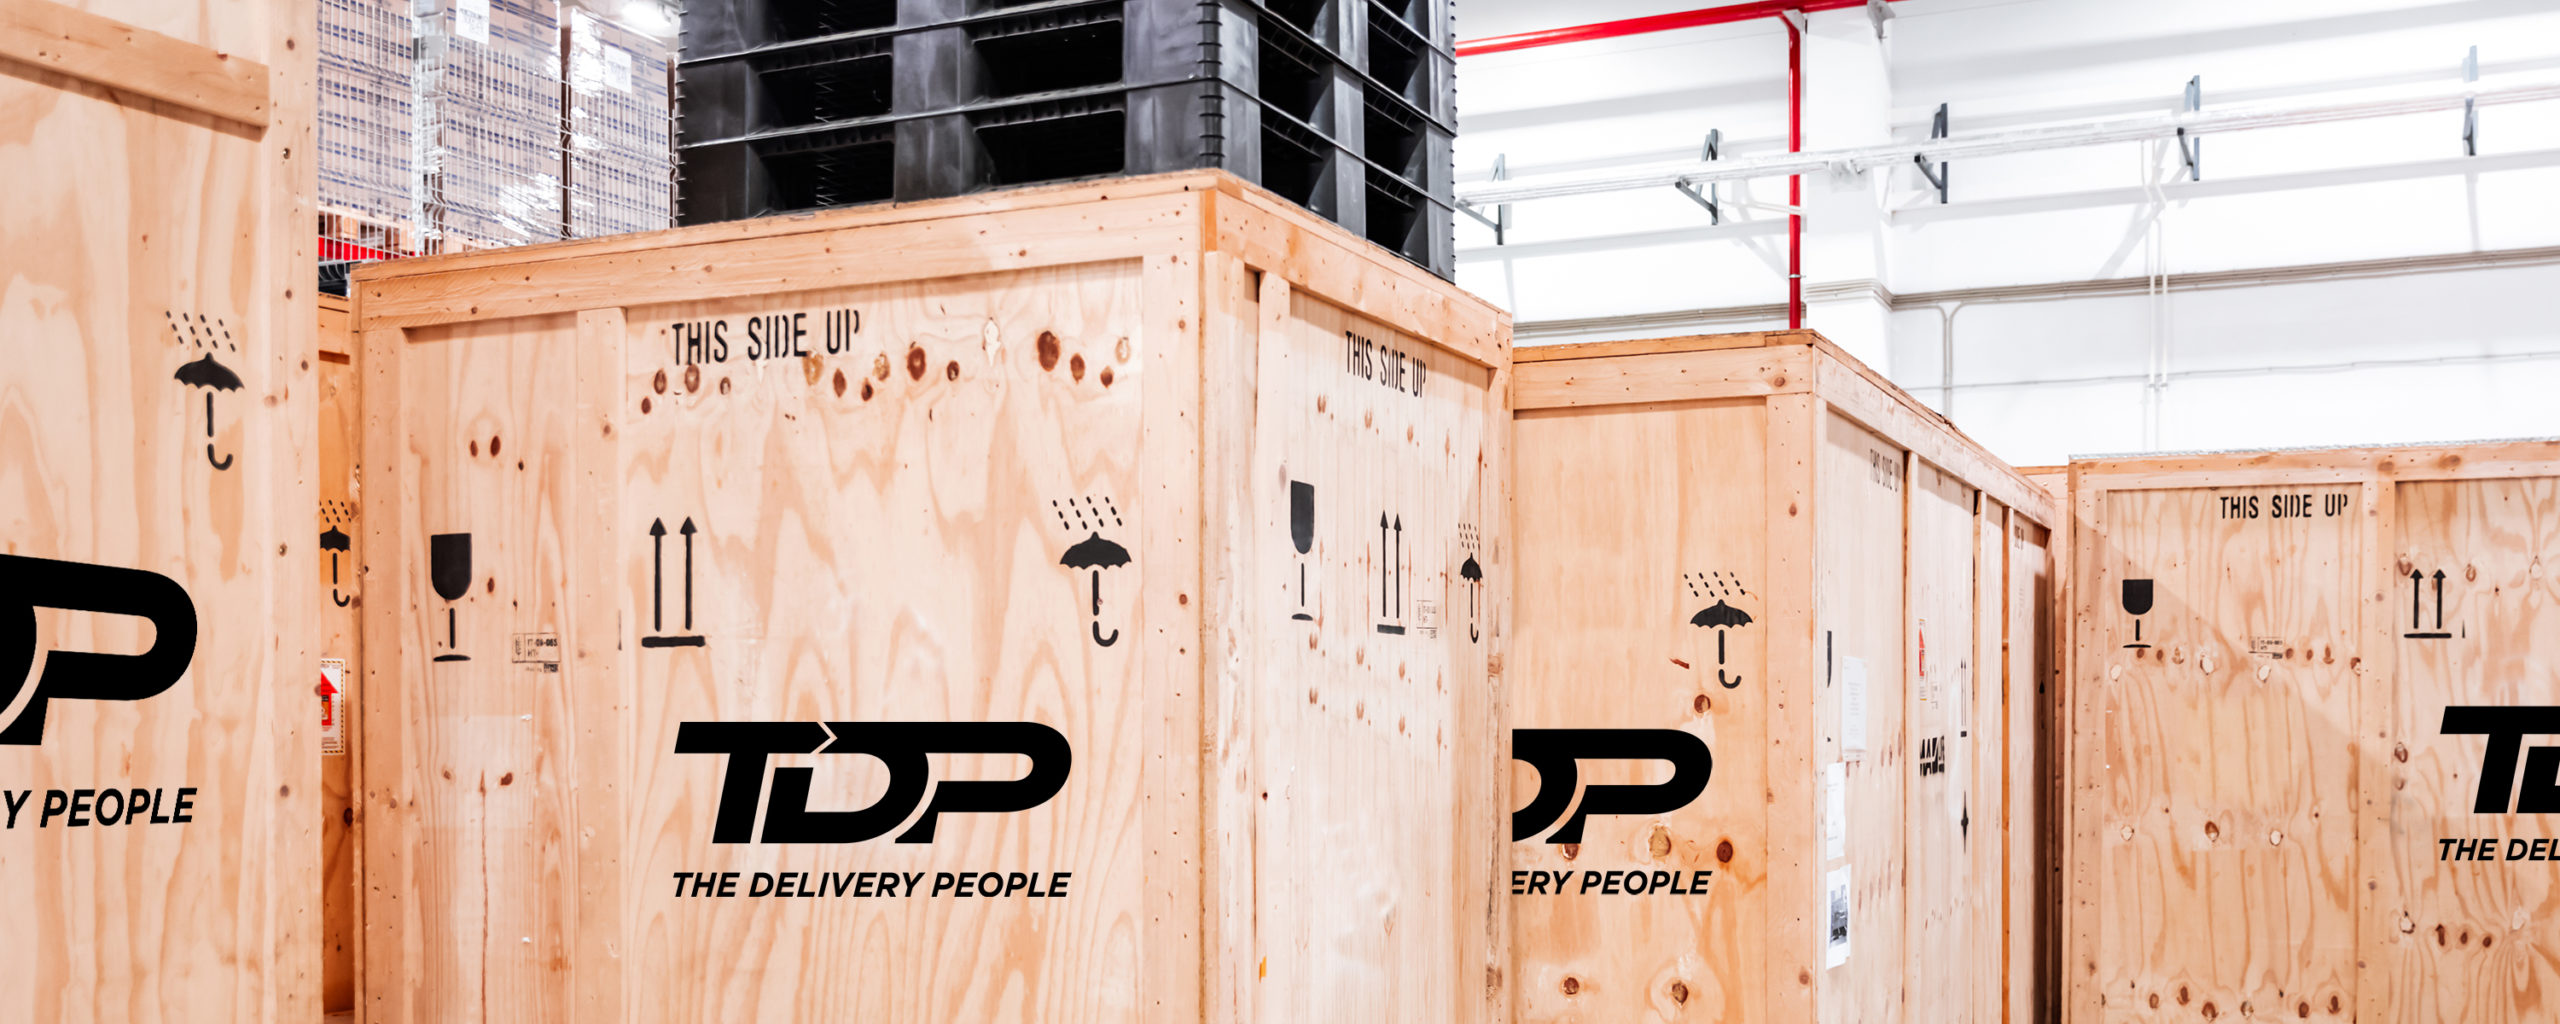 TDP Wooden Boxes In The Warehouse.